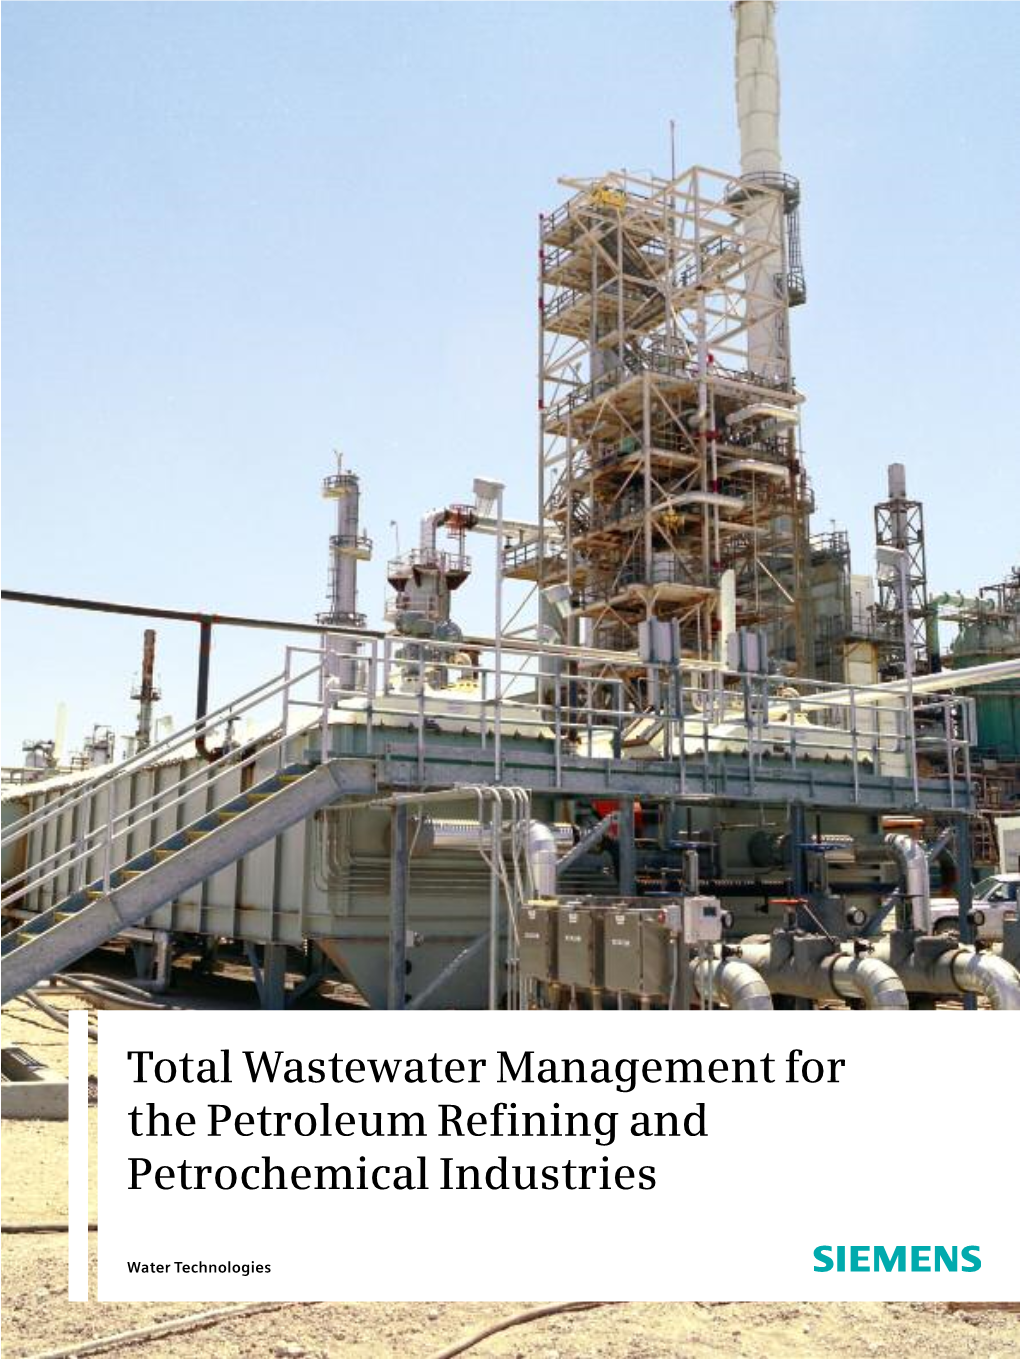 Total Wastewater Management for the Petroleum Refining and Petrochemical Industries